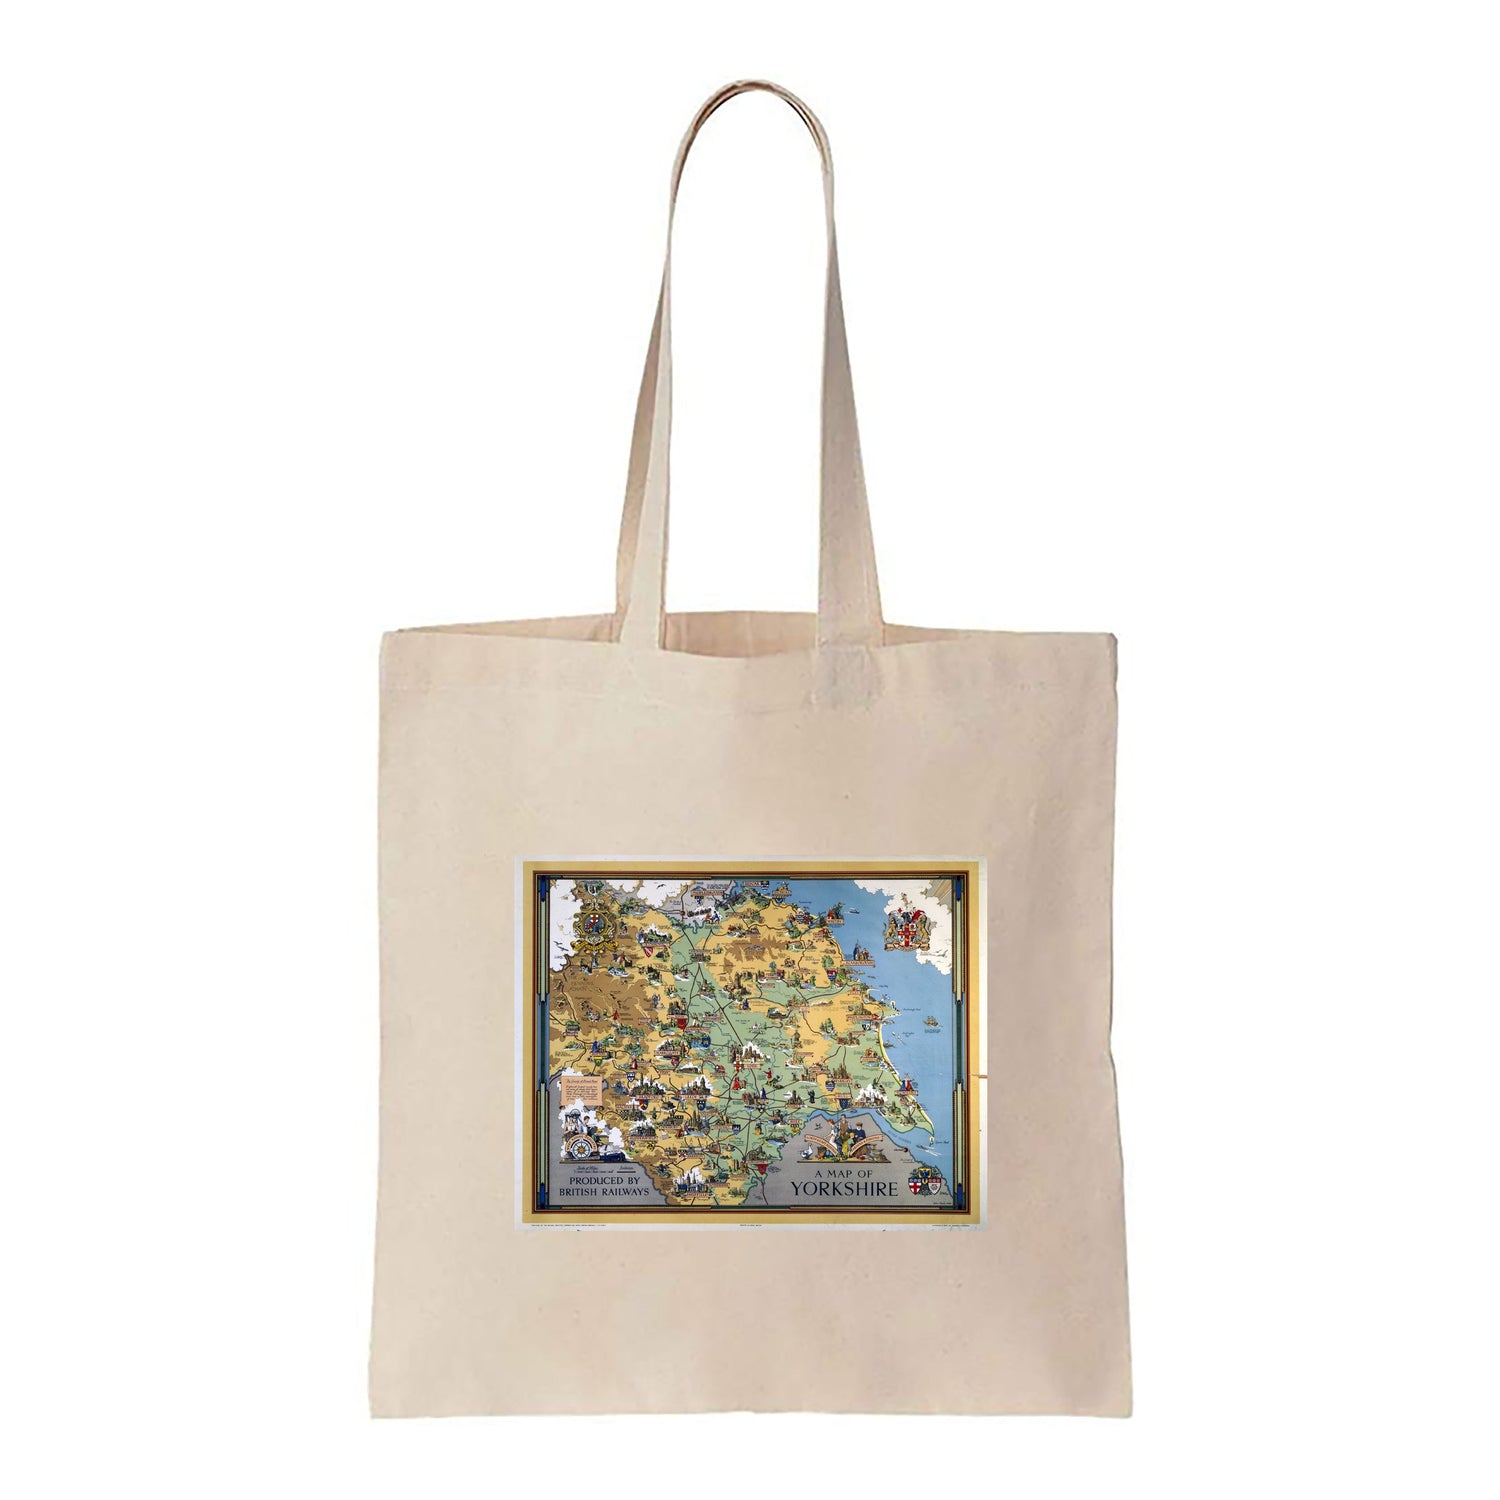 A Map of Yorkshire British Railways - Canvas Tote Bag